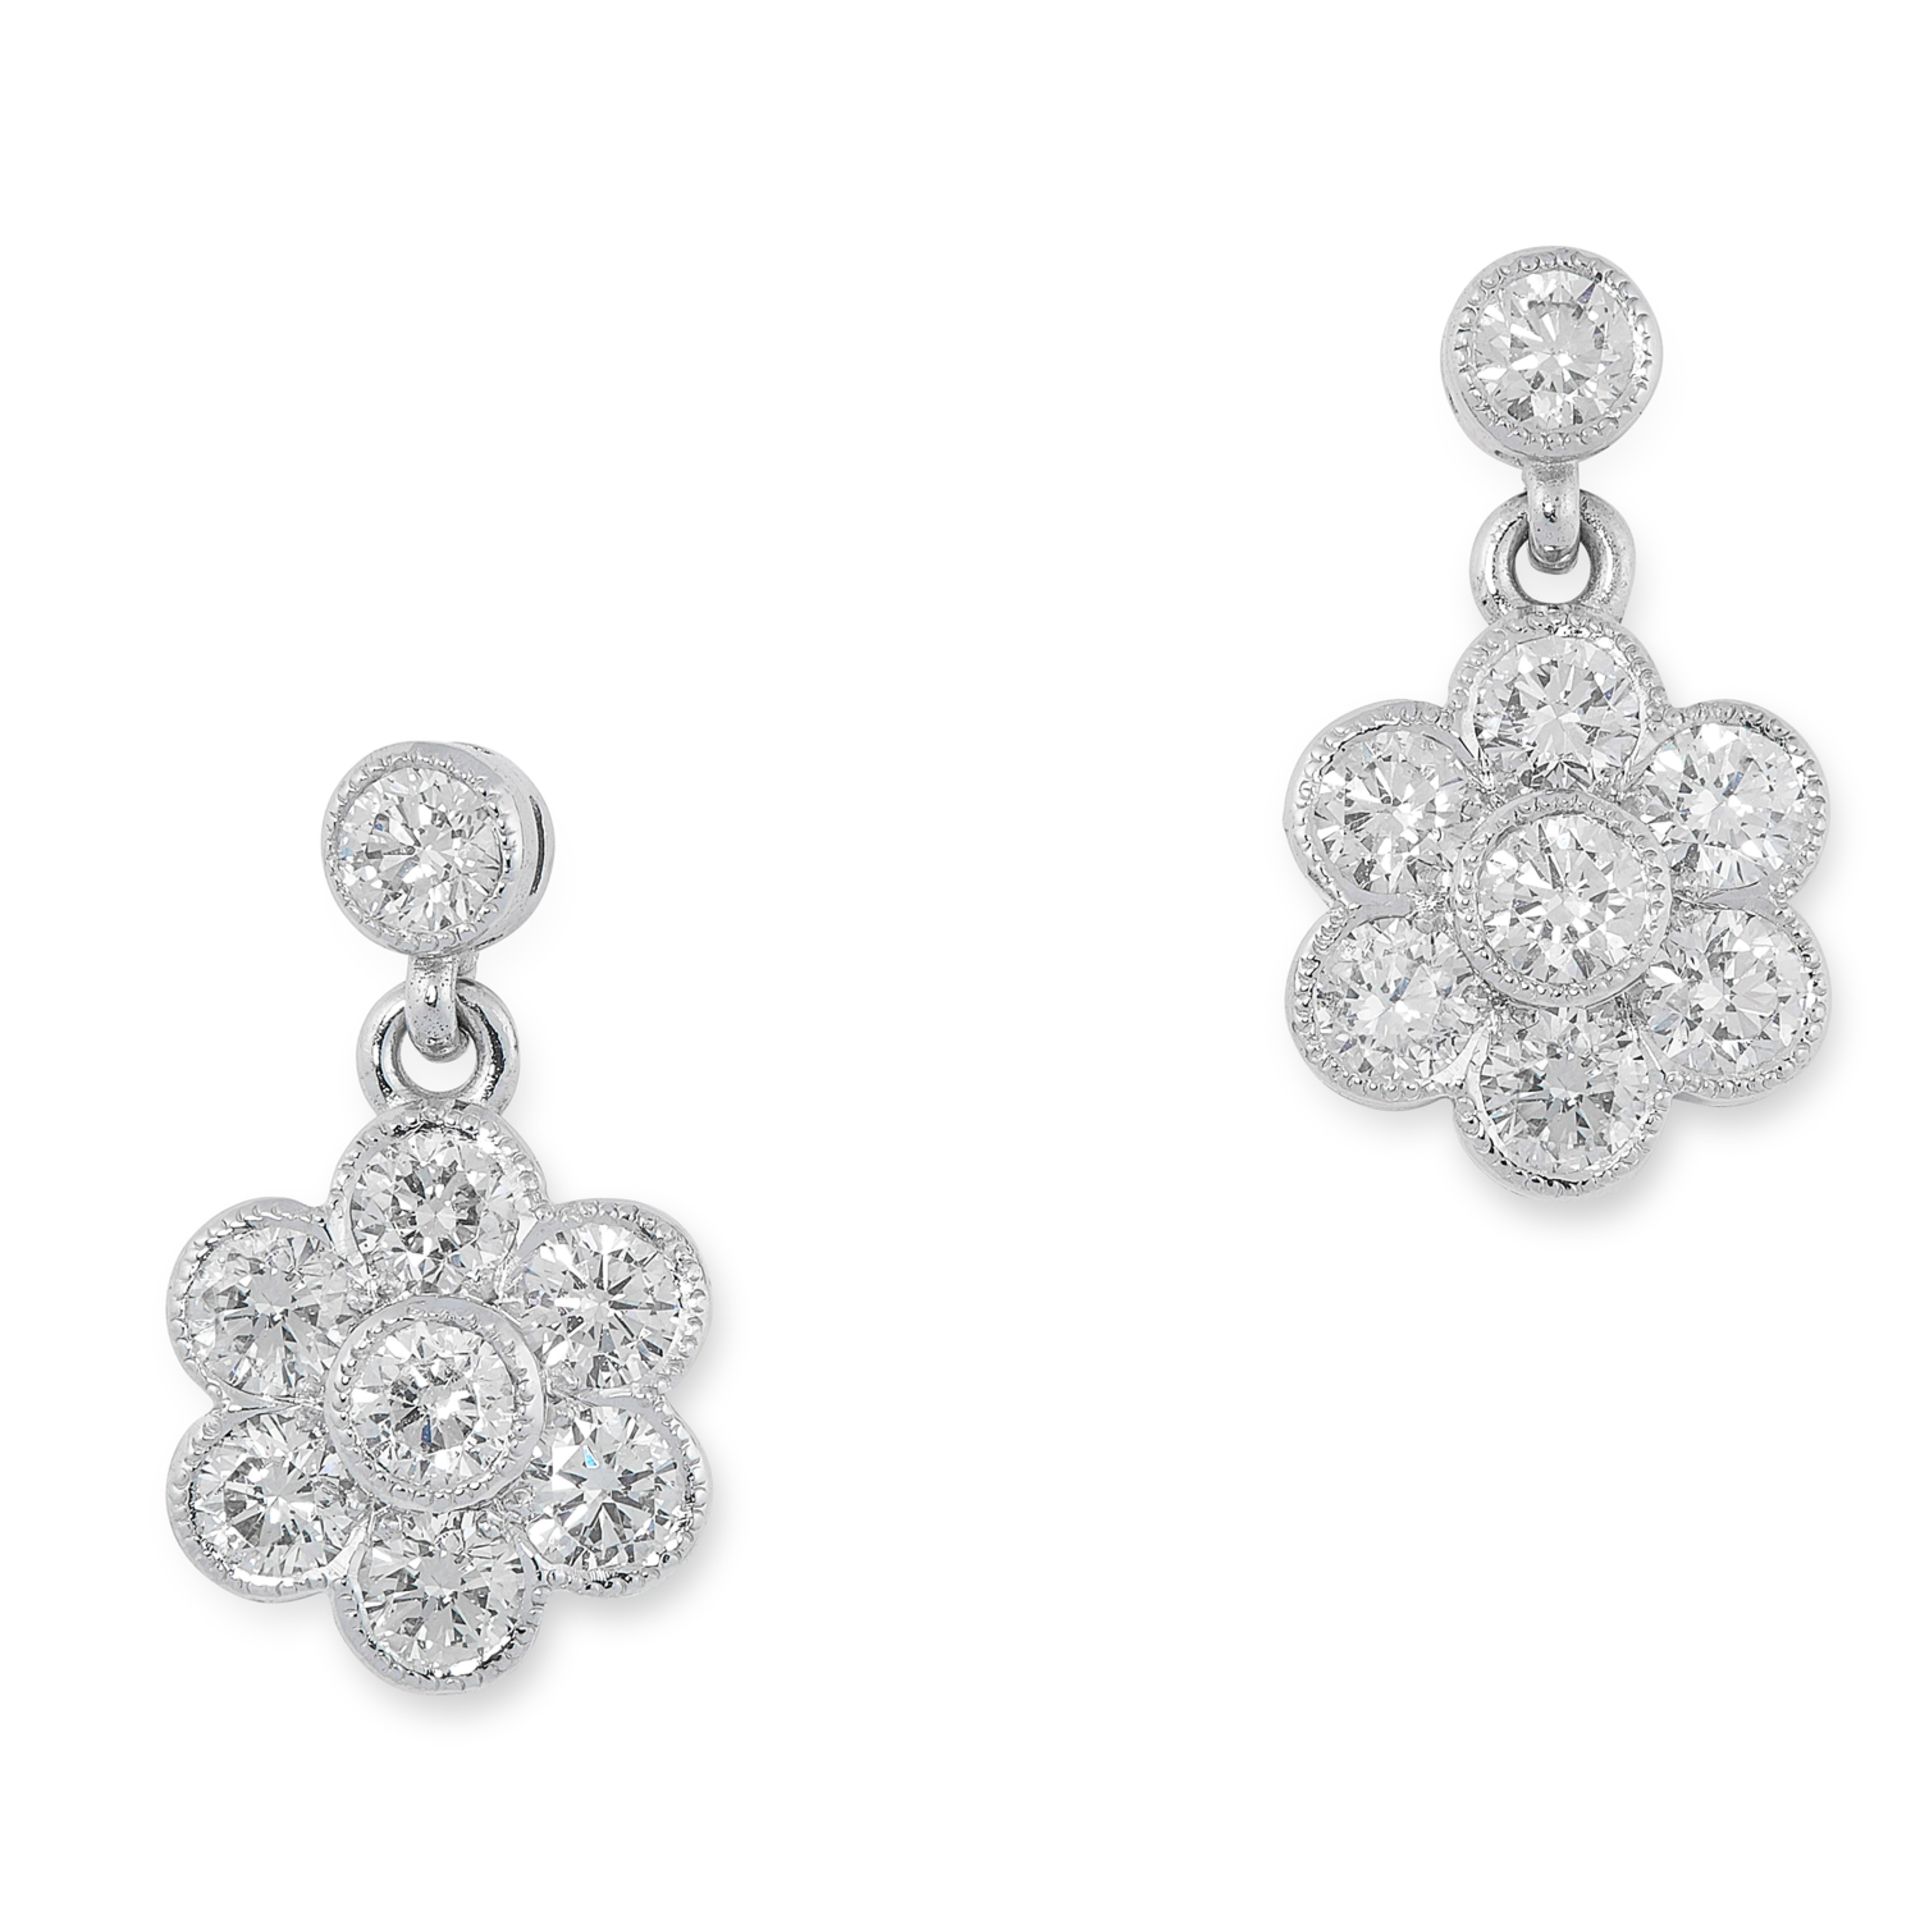 A PAIR OF DIAMOND CLUSTER EARRINGS in 18ct white gold, set with a round cut diamond, suspending a